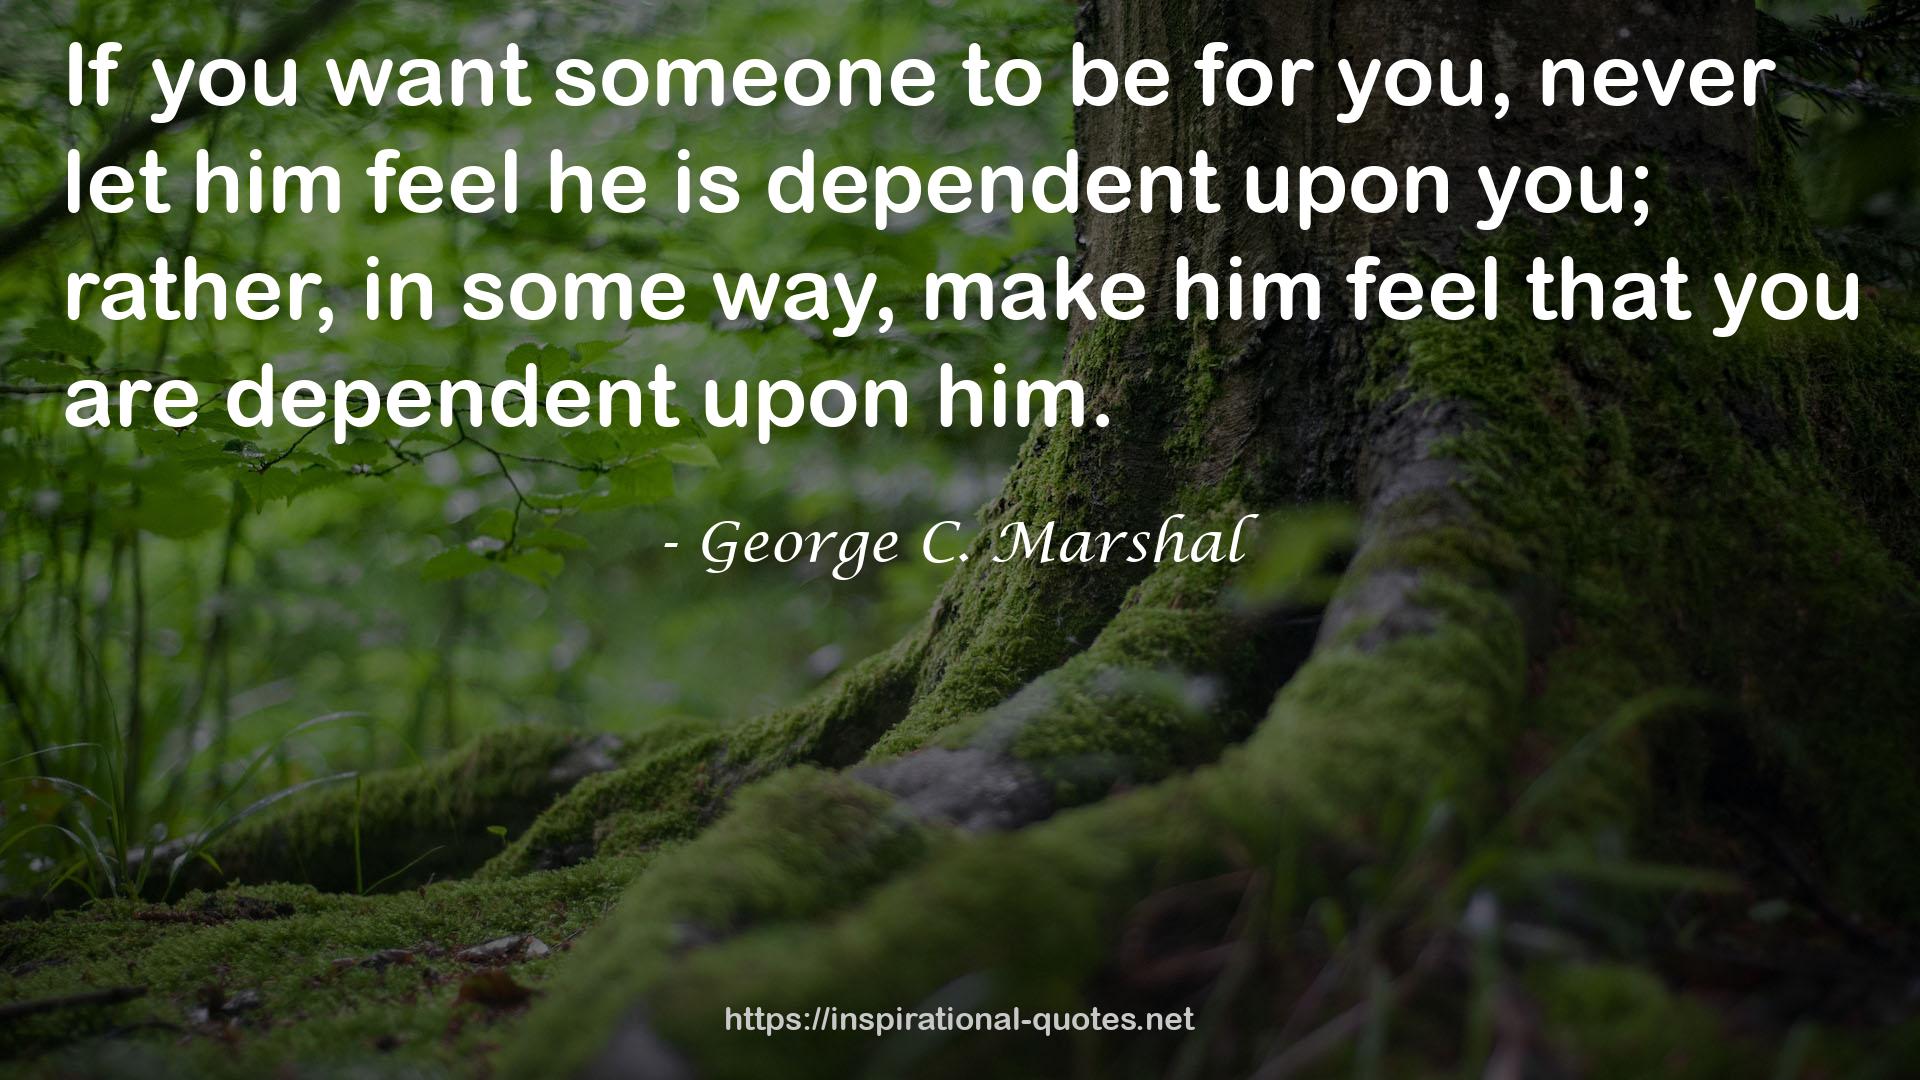 George C. Marshal QUOTES